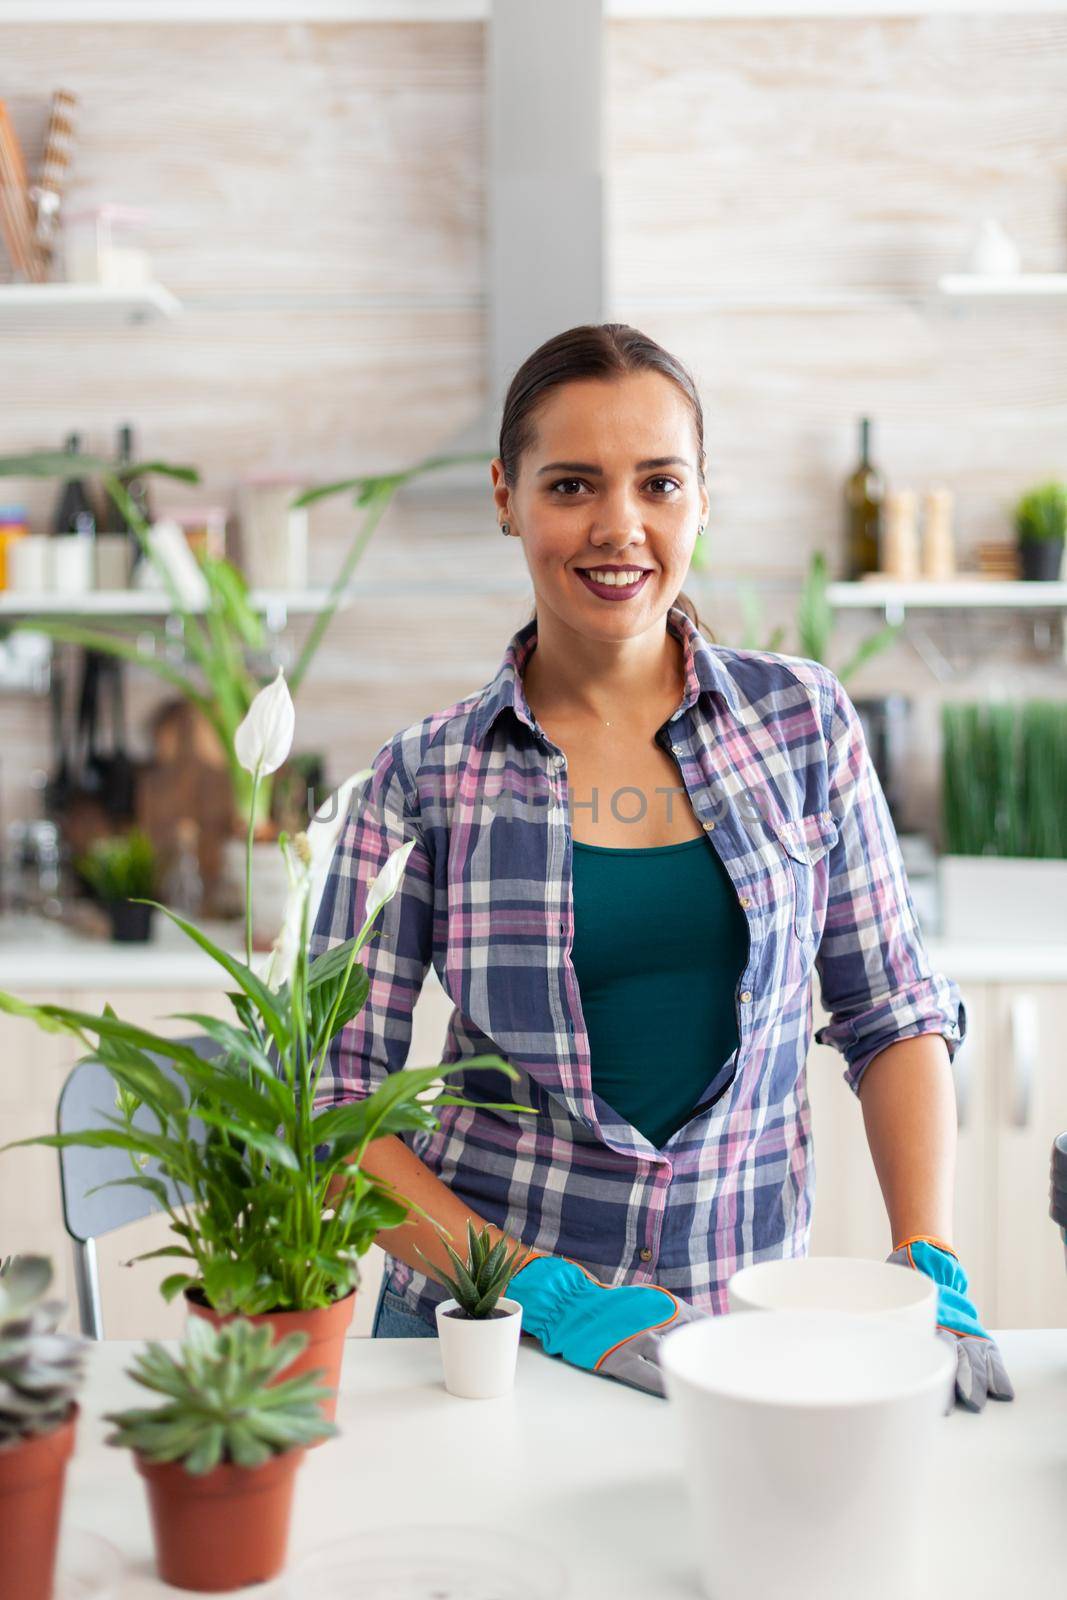 Florist woman looking at camera while planting flowers in kitchen for home decoration. Decorative, plants, growing, lifestyle, design, , dirt, domestic, growh, leaf, hobby, seeding, care,